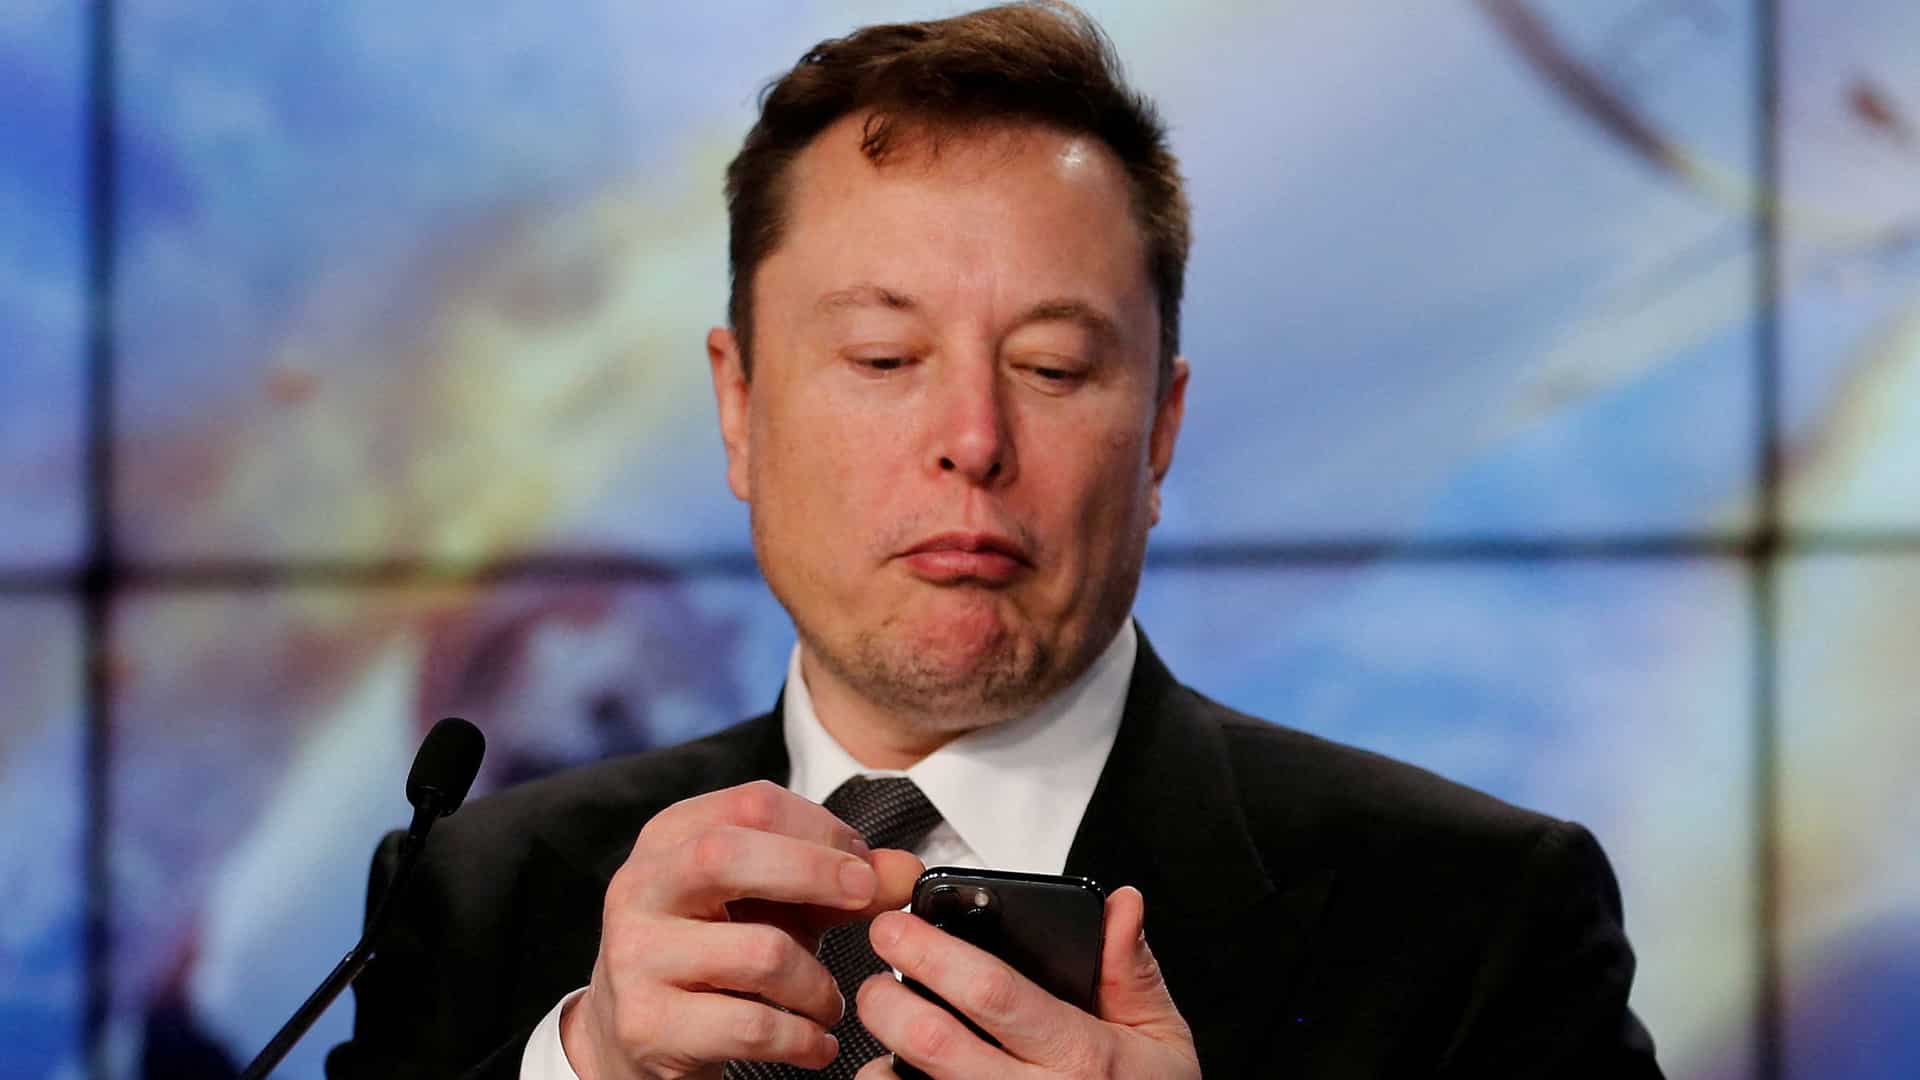 Elon Musk's Twitter takeover: Govt expects platforms to comply with local rules